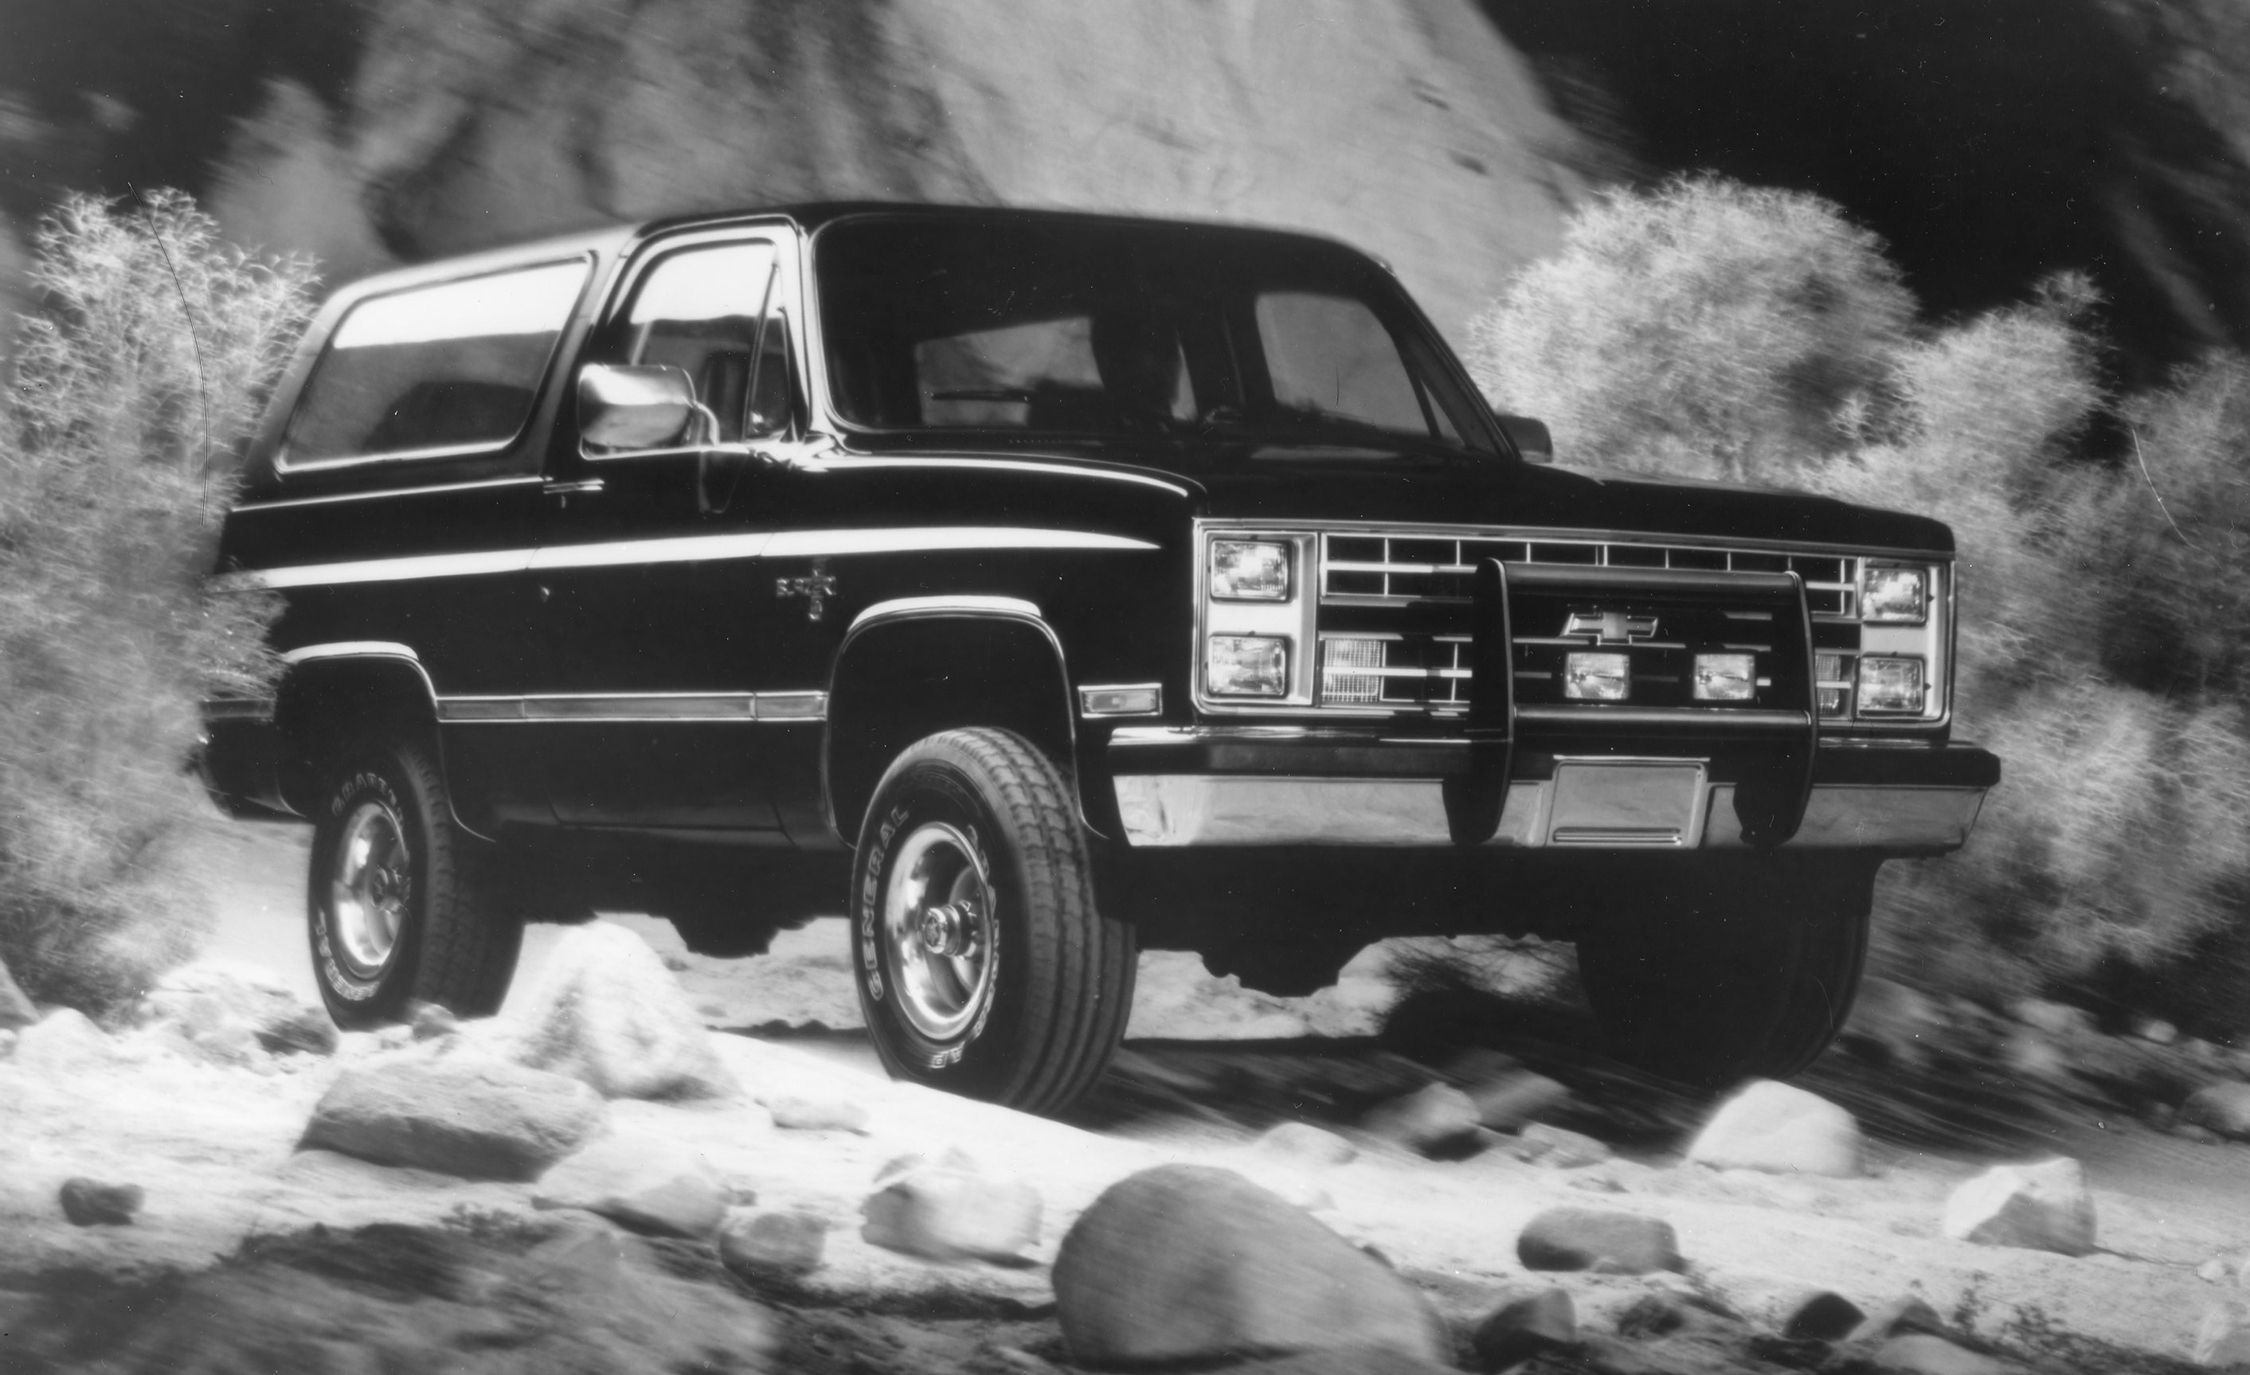 A Visual History of the Chevrolet Blazer: 1969 to Today